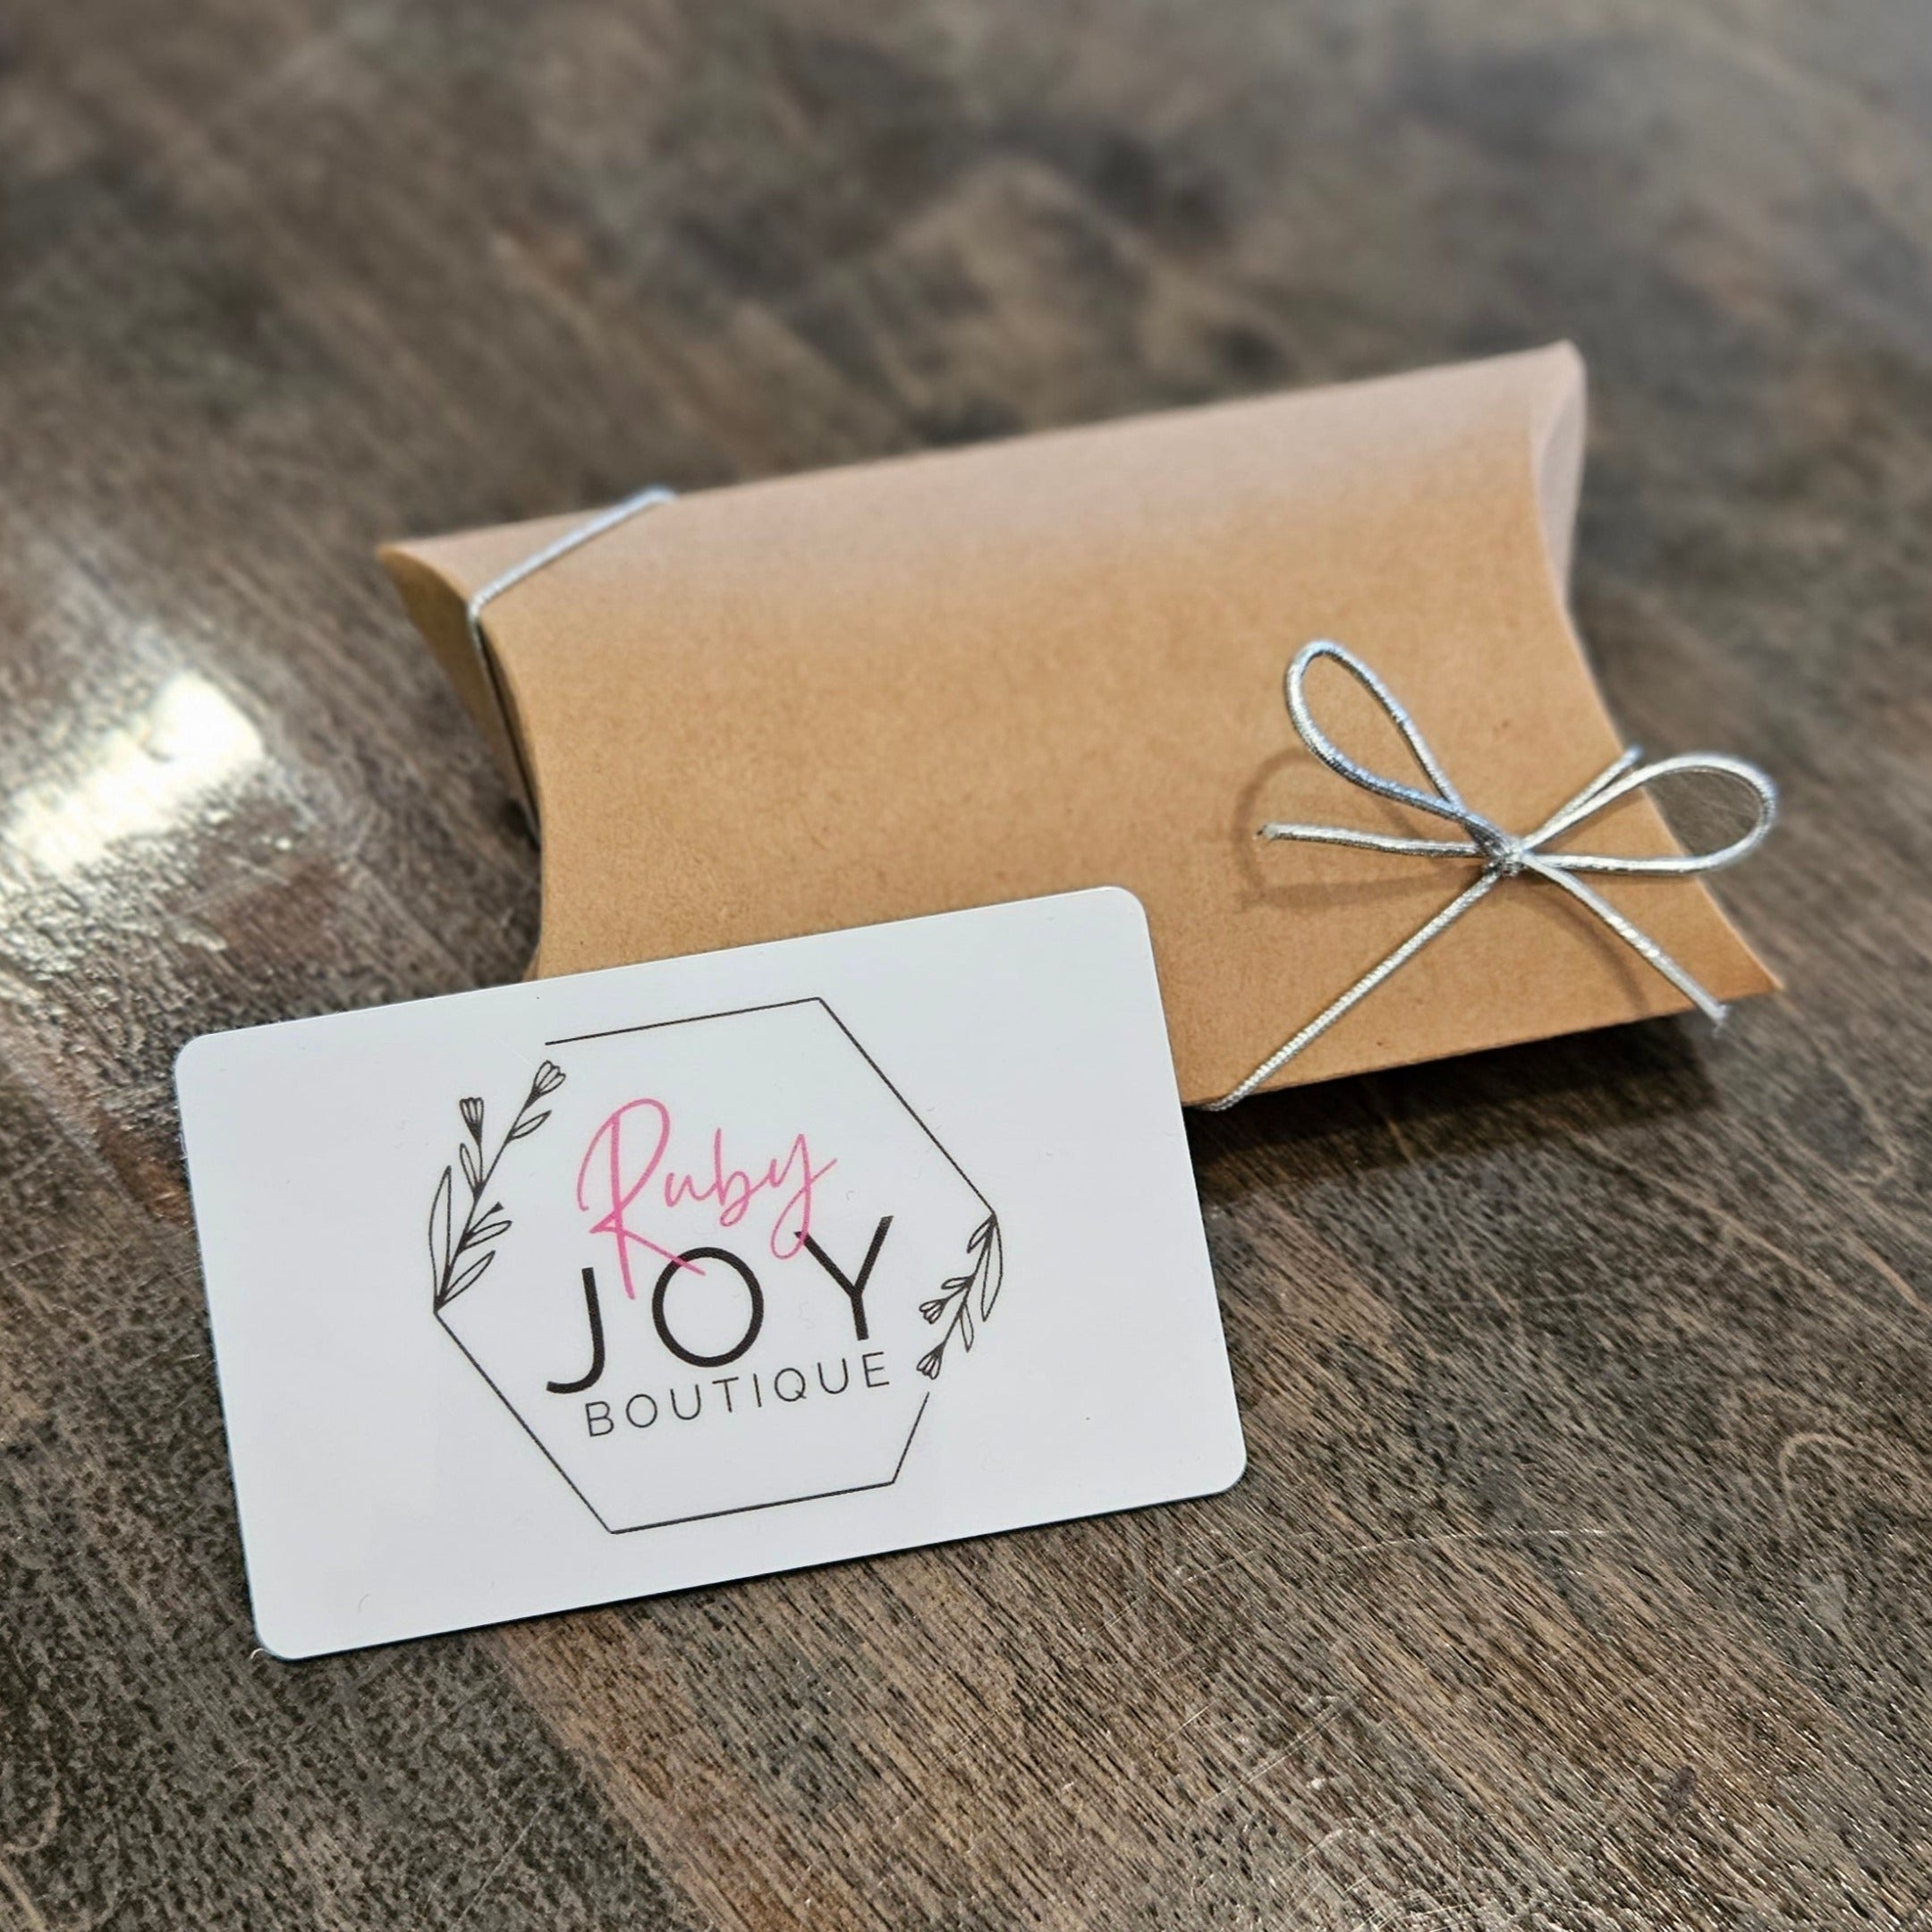 Shop Ruby Joy Boutique E-Gift Card-Gift Cards at Ruby Joy Boutique, a Women's Clothing Store in Pickerington, Ohio